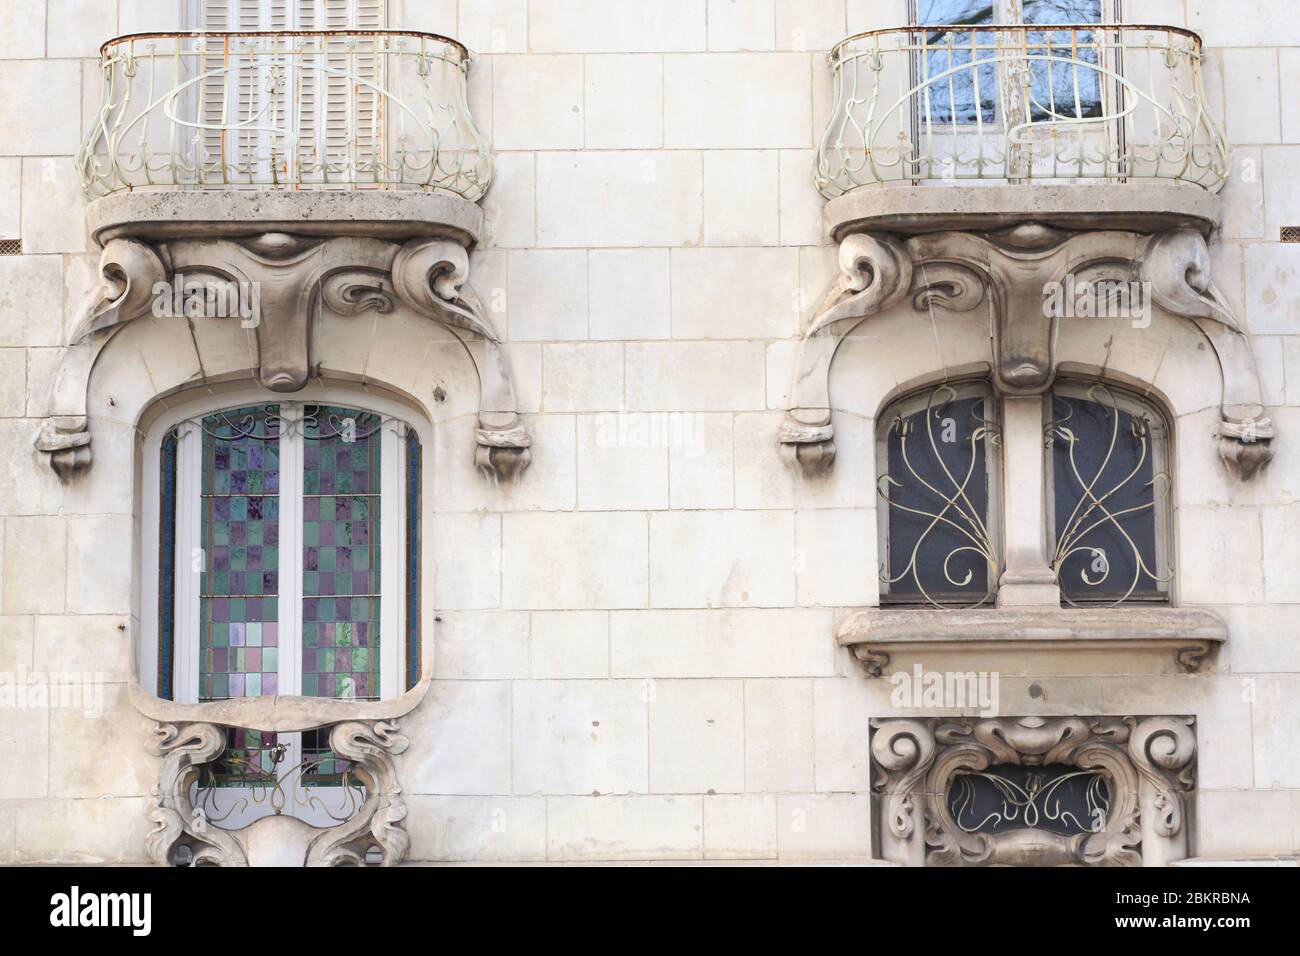 France, Loiret, Orleans, 10 quai Barentin, Morland house in Art Nouveau style (1906) built by Philippe Morland, (collaborator of the architect Hector Guimard) Stock Photo